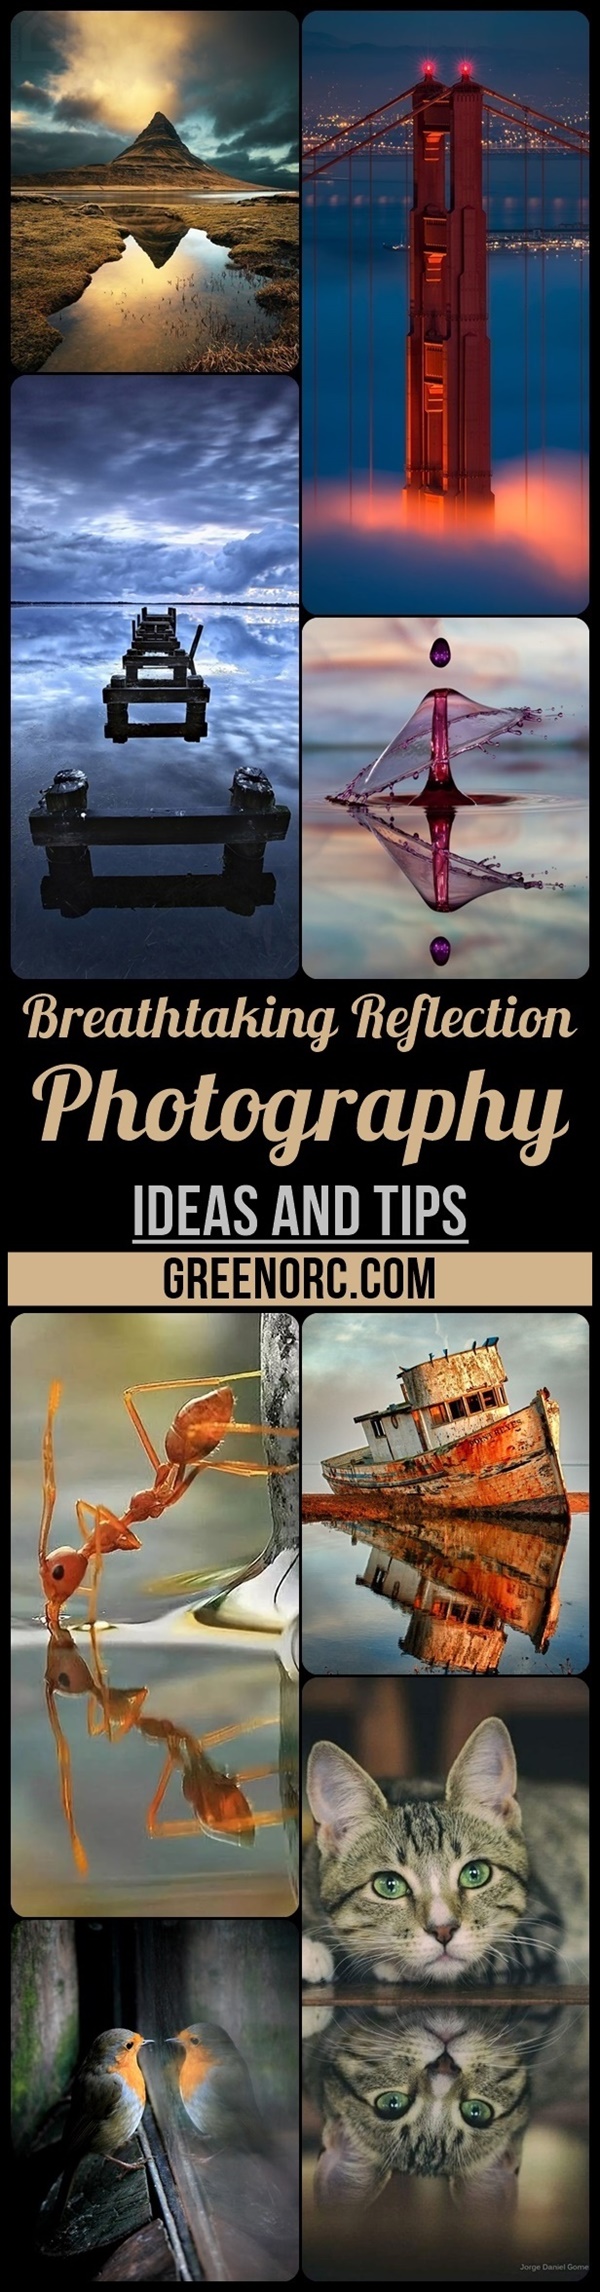 Breathtaking Reflection Photography Ideas and Tips